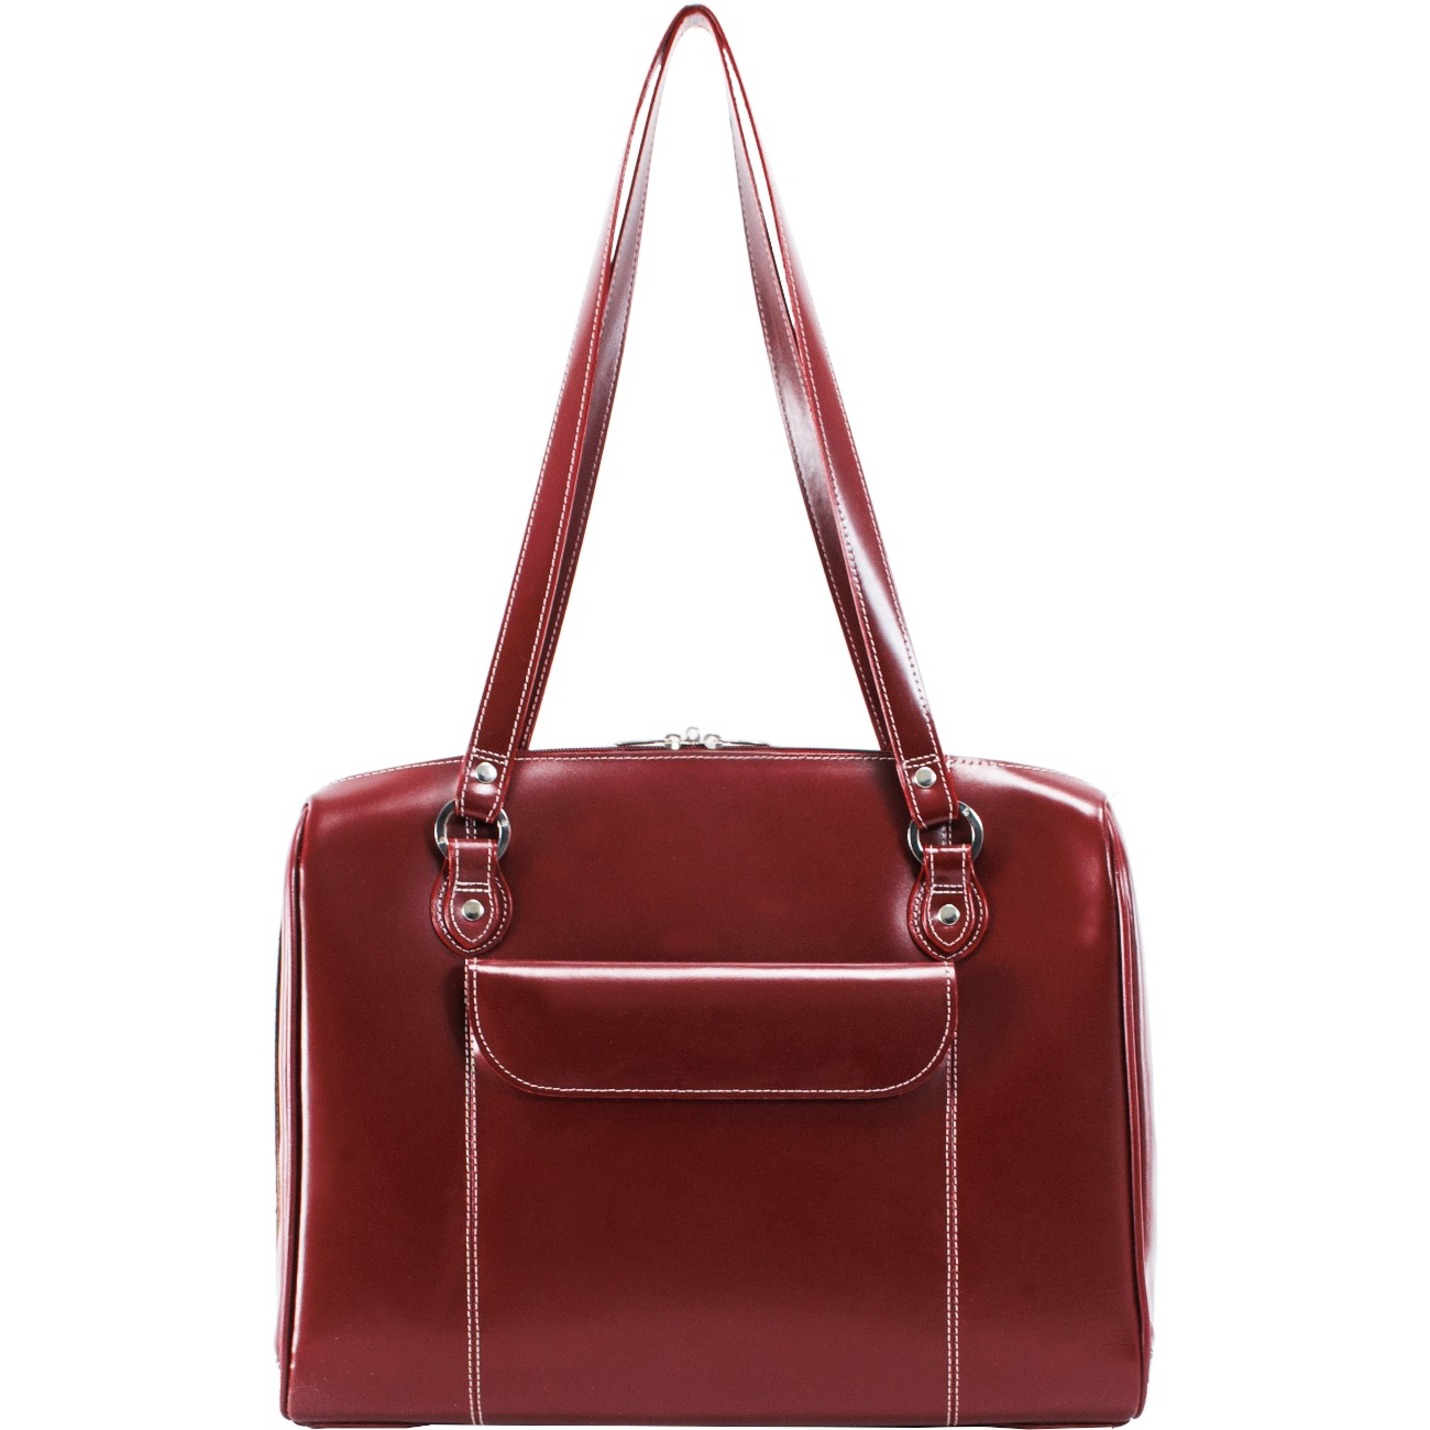 McKlein GLENVIEW, Ladies' Laptop Briefcase, Top Grain Cowhide Leather, Red (94746) - image 3 of 5